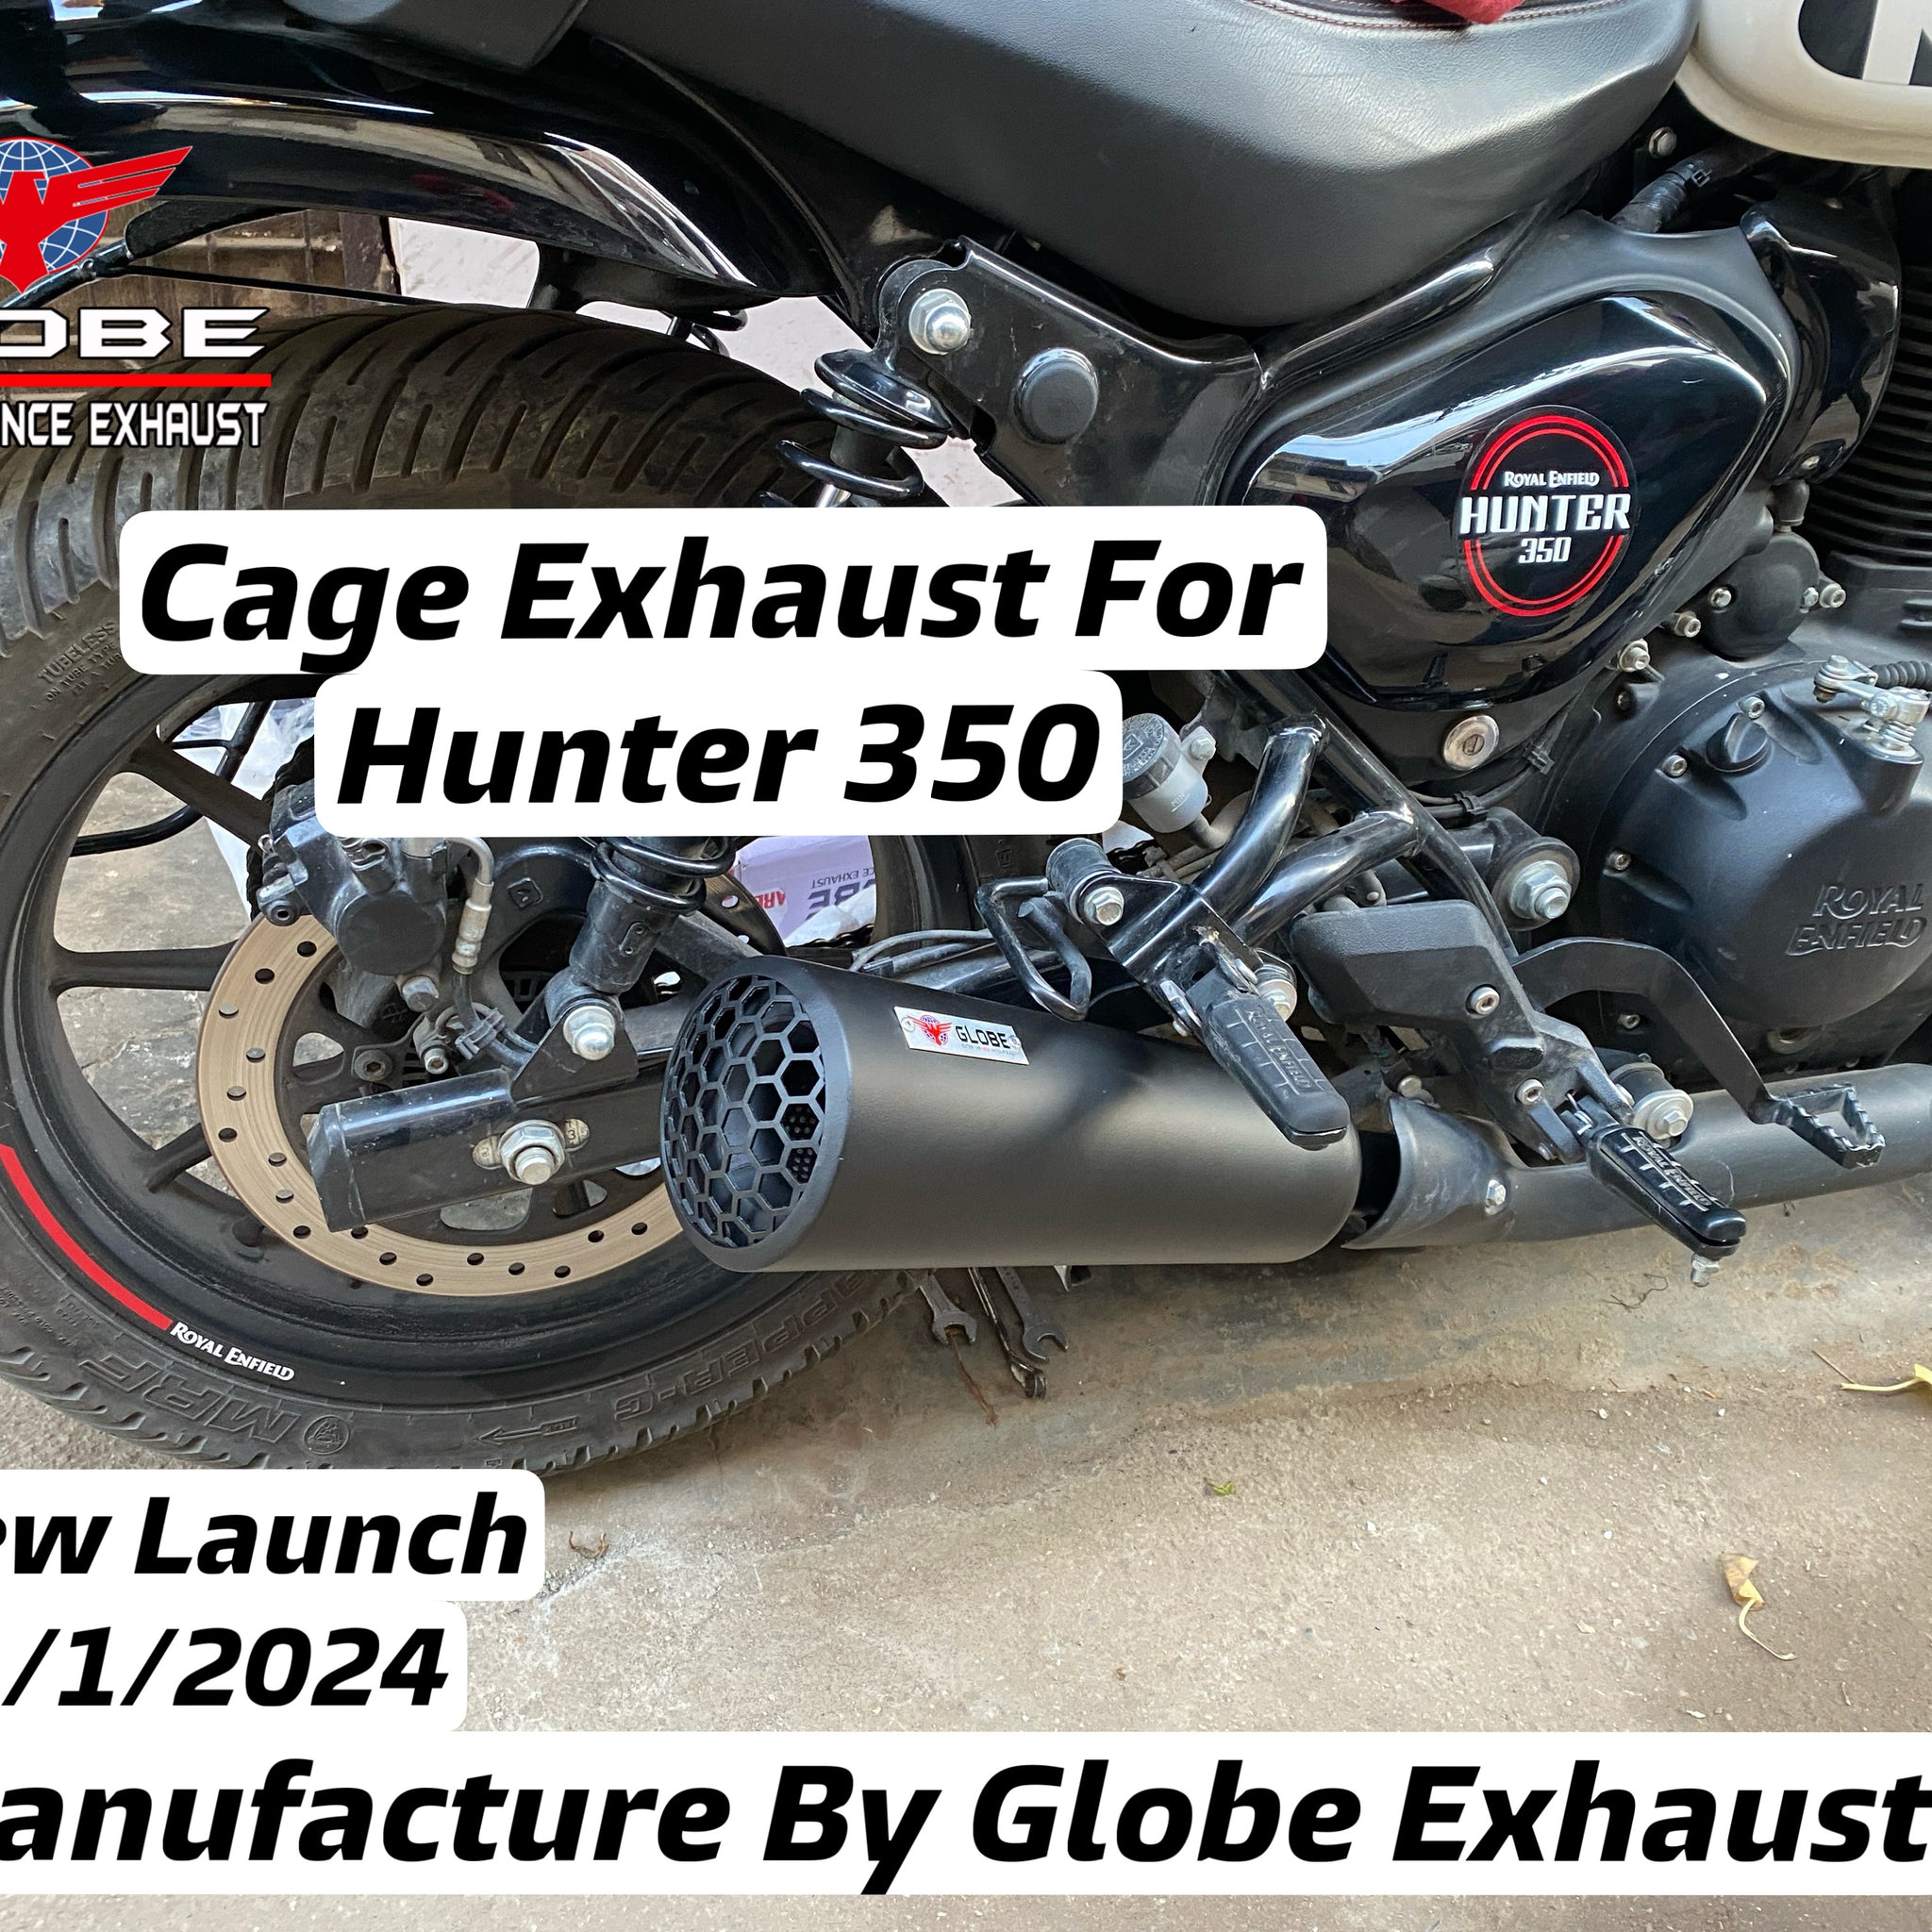 Cage Exhaust For Hunter 350 Royal Enfield